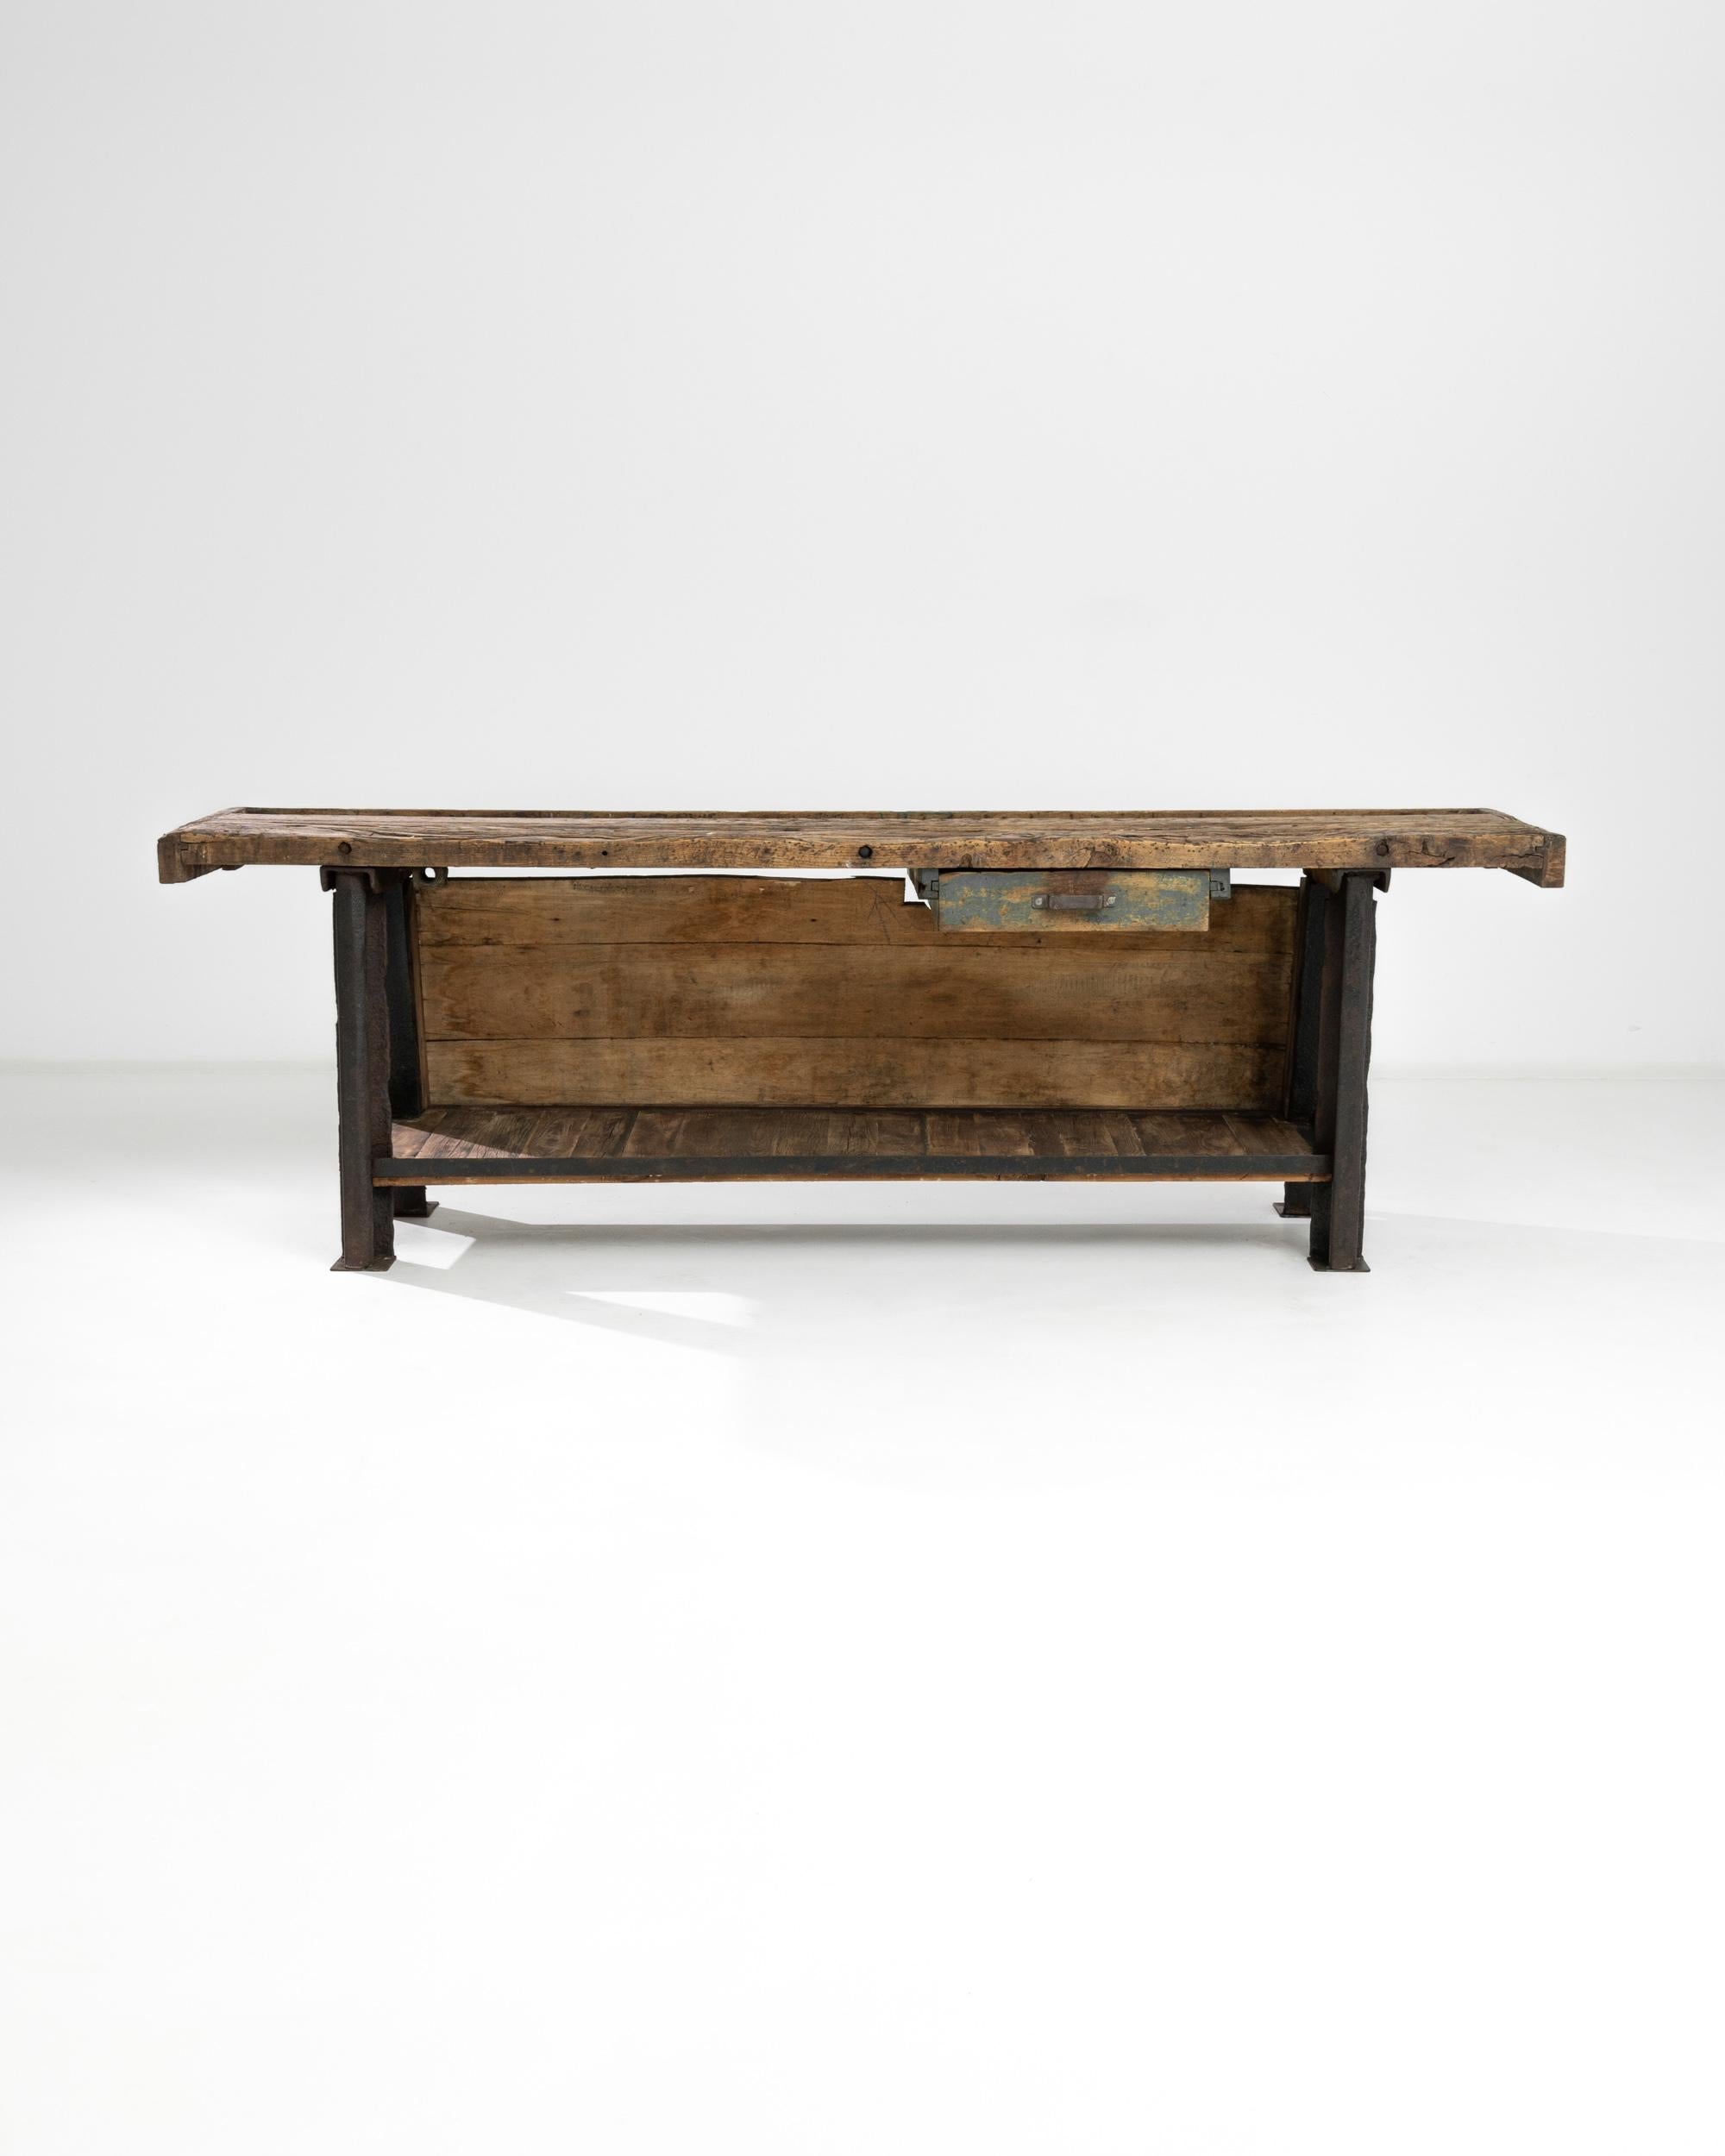 A metal table with wooden top from Central Europe, produced during the 20th Century. With a heavy iron frame, flanked on both sides with a slanted “A” shape, this work table will add an element of industry to any interior. A long working surface,